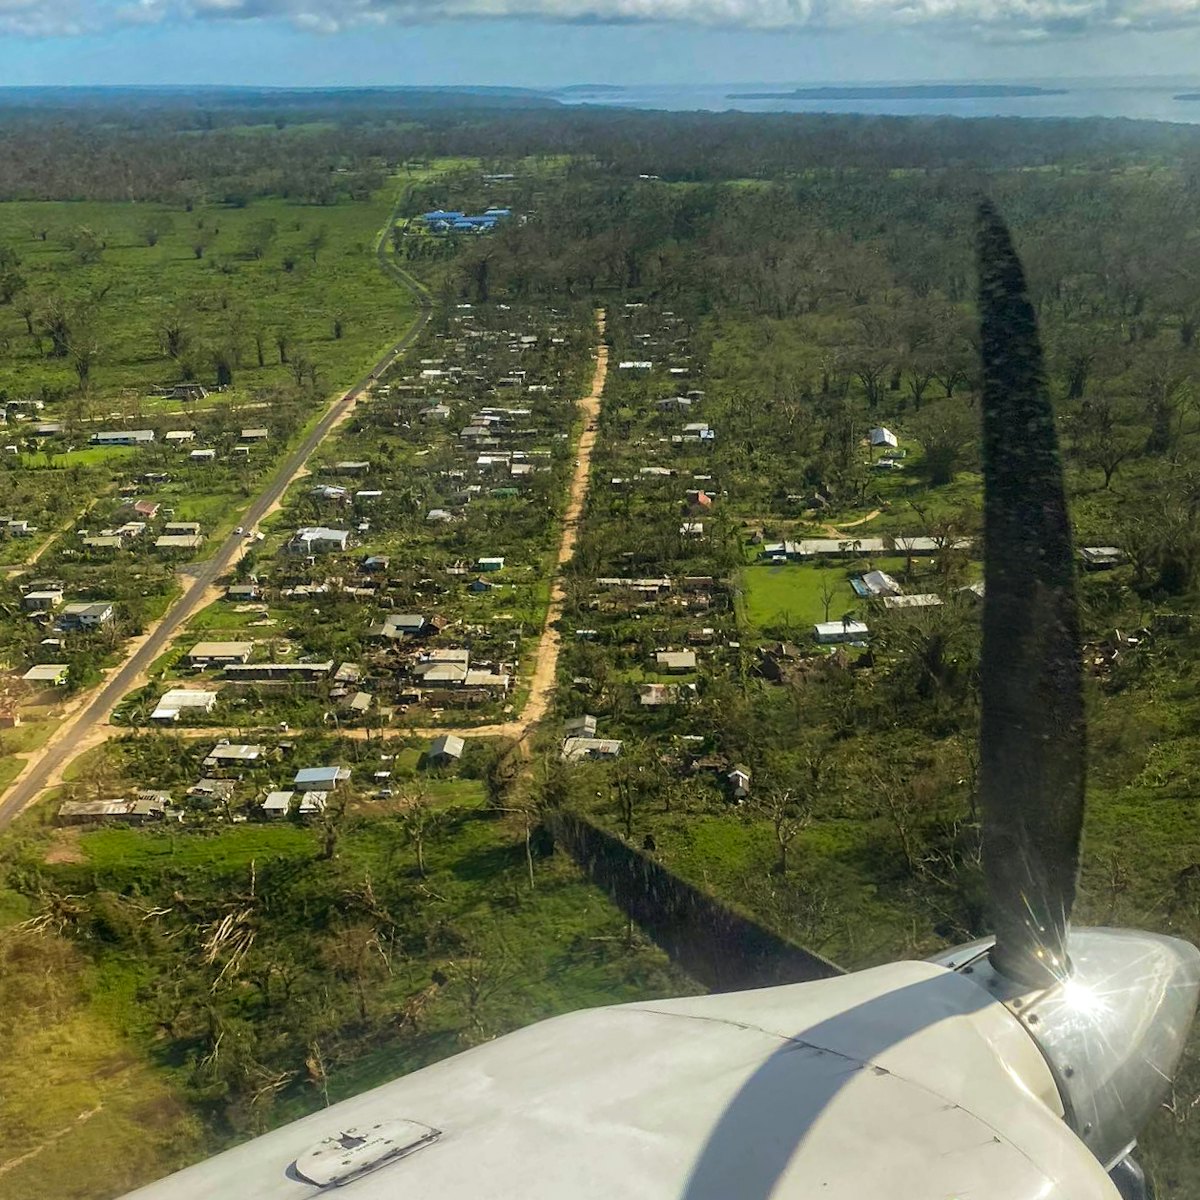 An aerial view of the effects of Cyclone Harold on the island of Espiritu Santo, Vanuatu, showing damaged buildings and stripped vegetation.